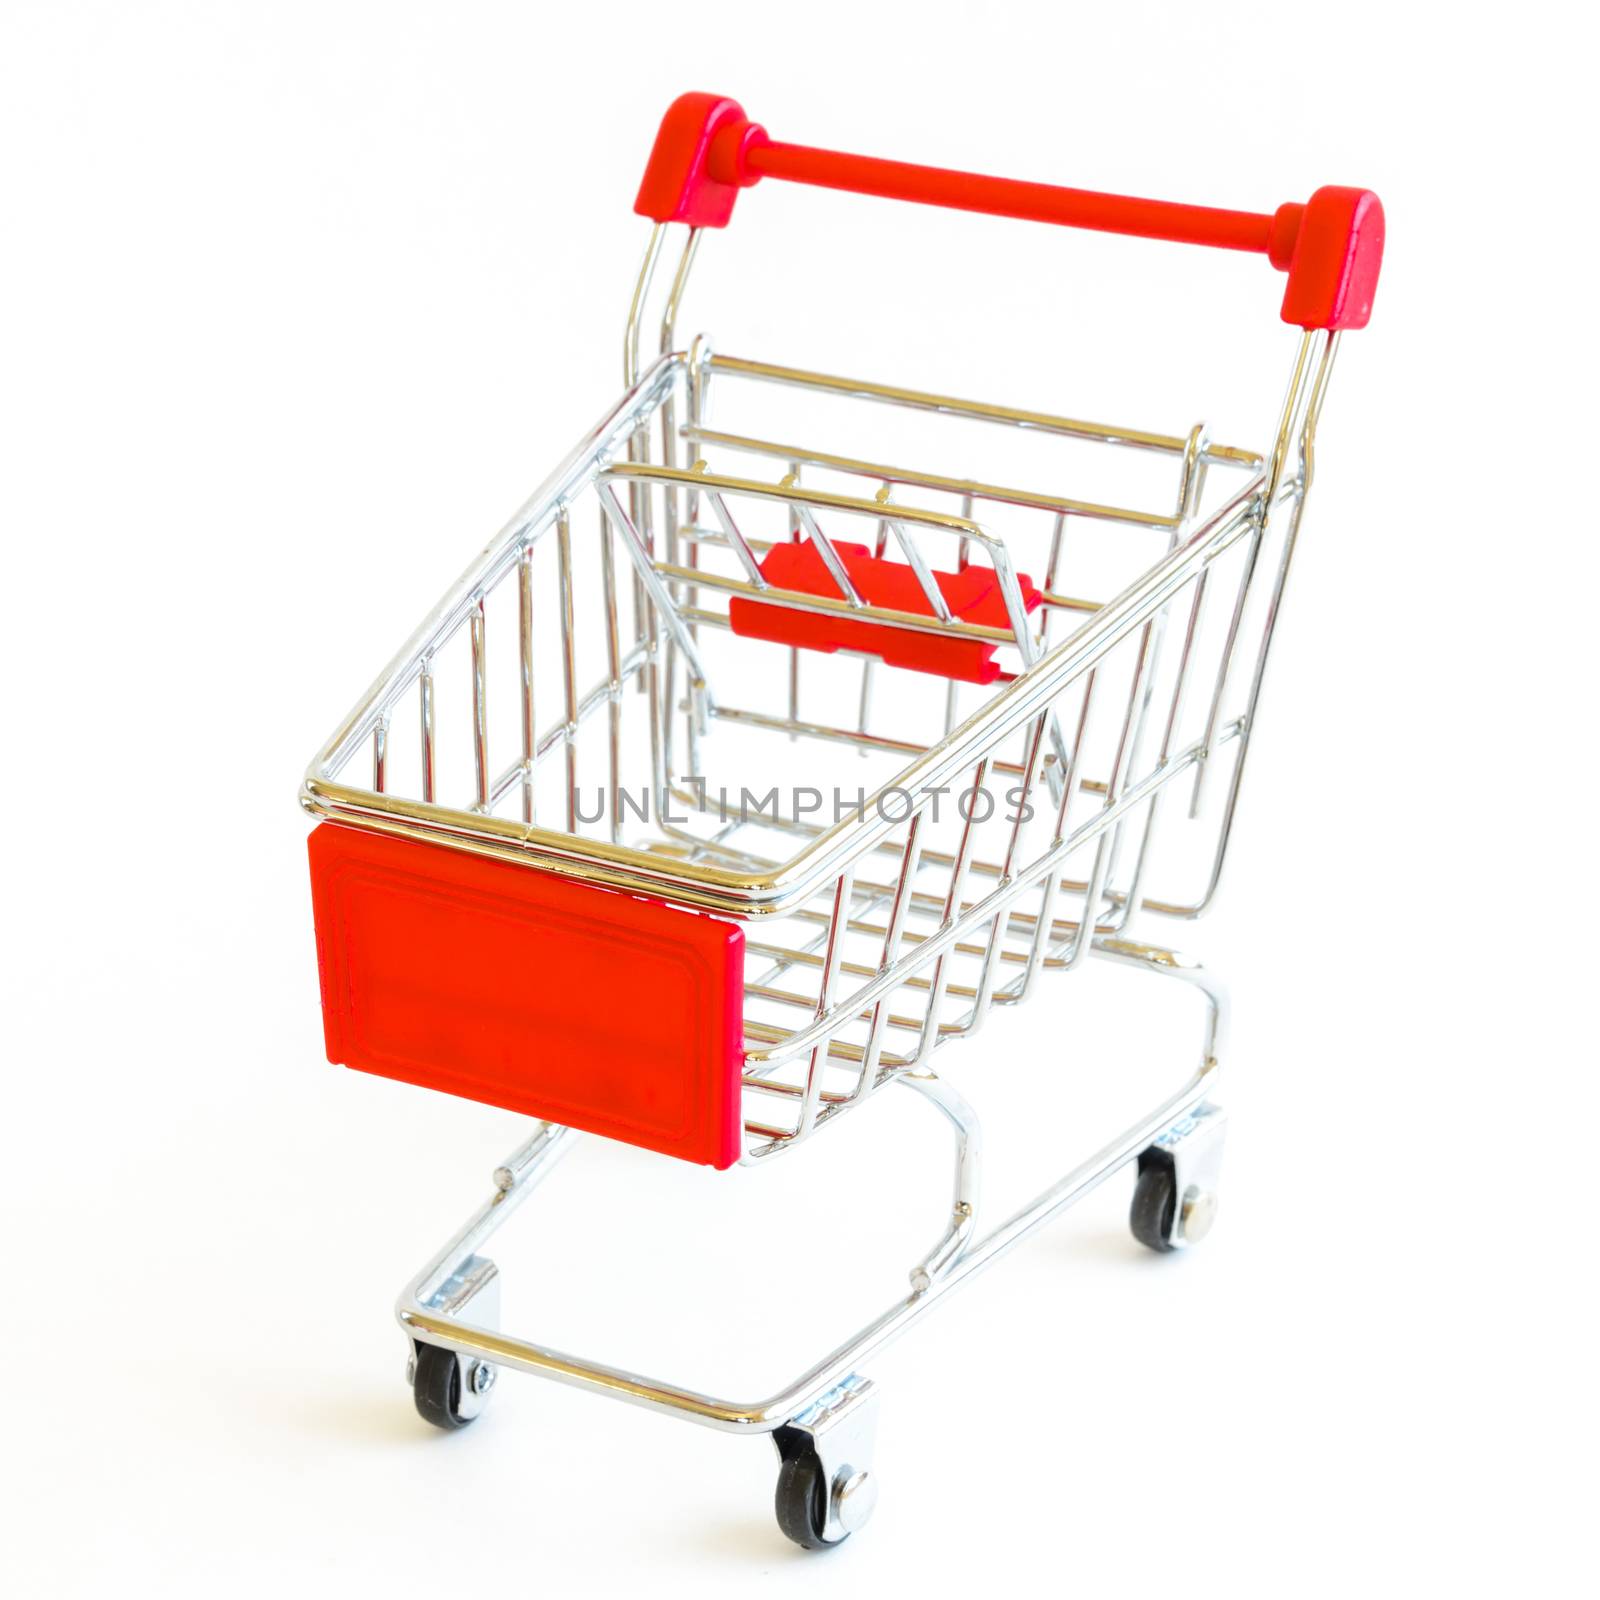 Studio shot empty tinny silver and red shopping cart isolated on white by trongnguyen